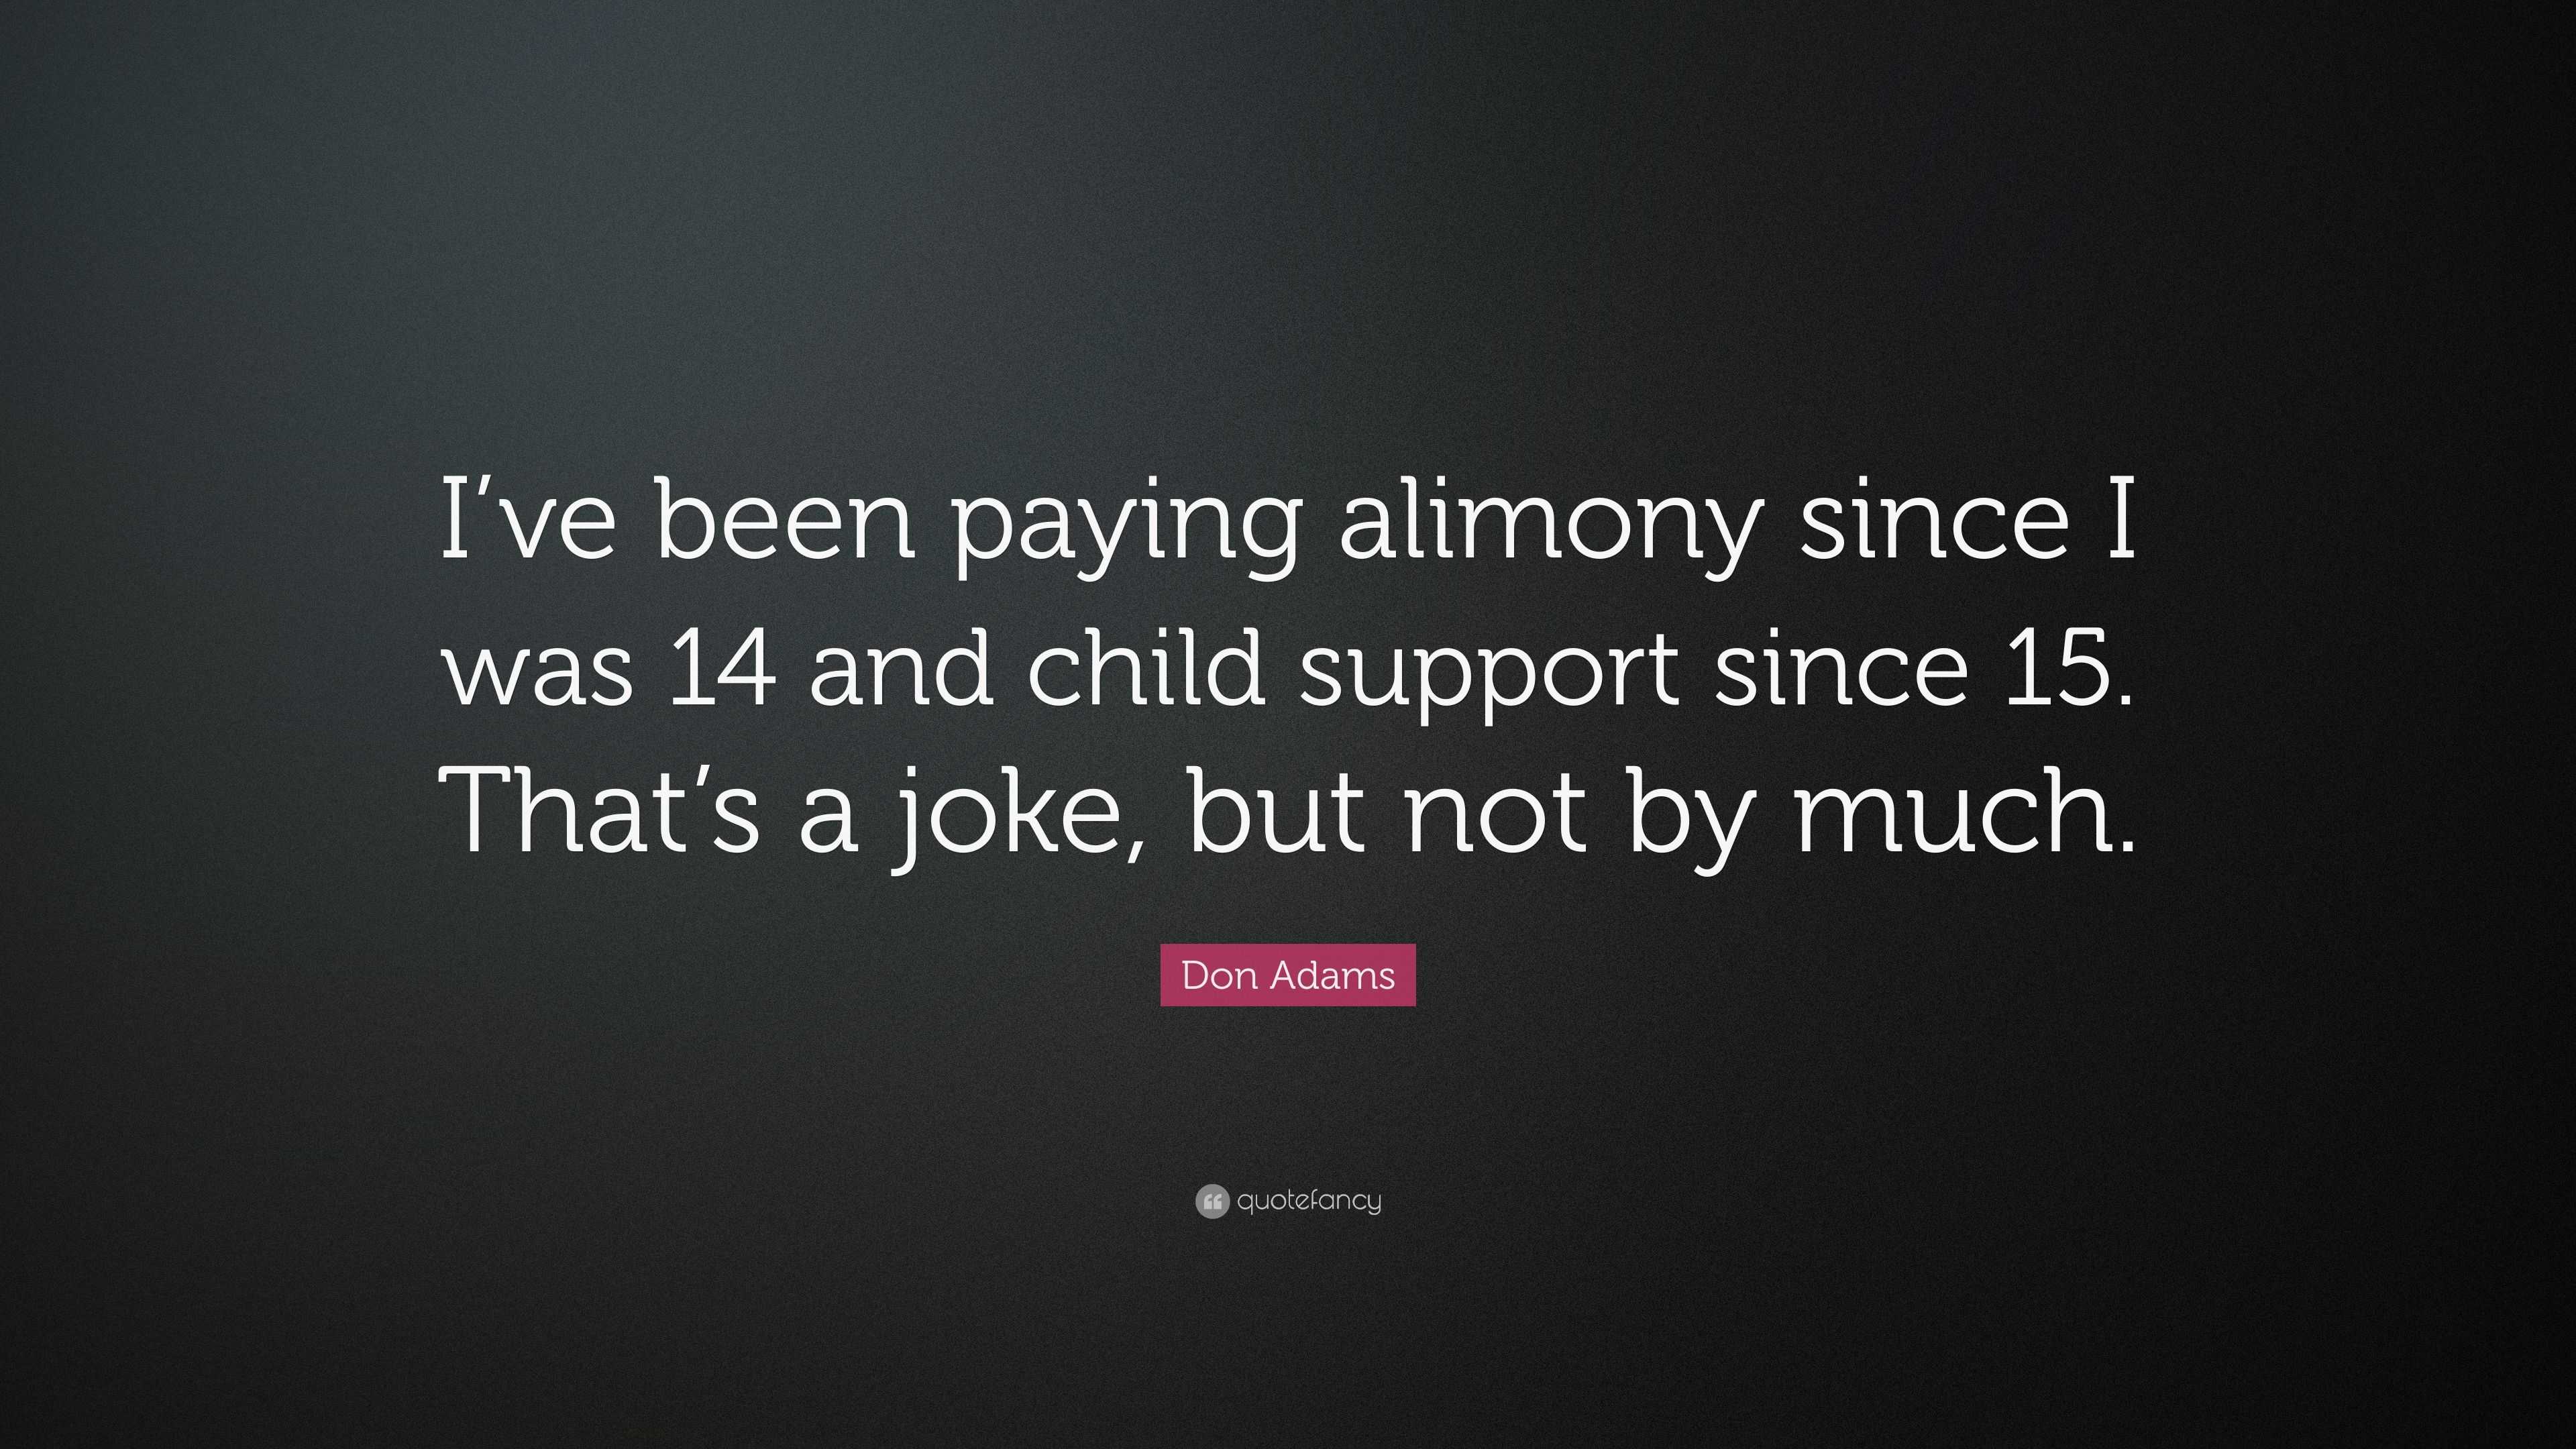 Don Adams Quote: “I've Been Paying Alimony Since I Was 14 And Child Support Since